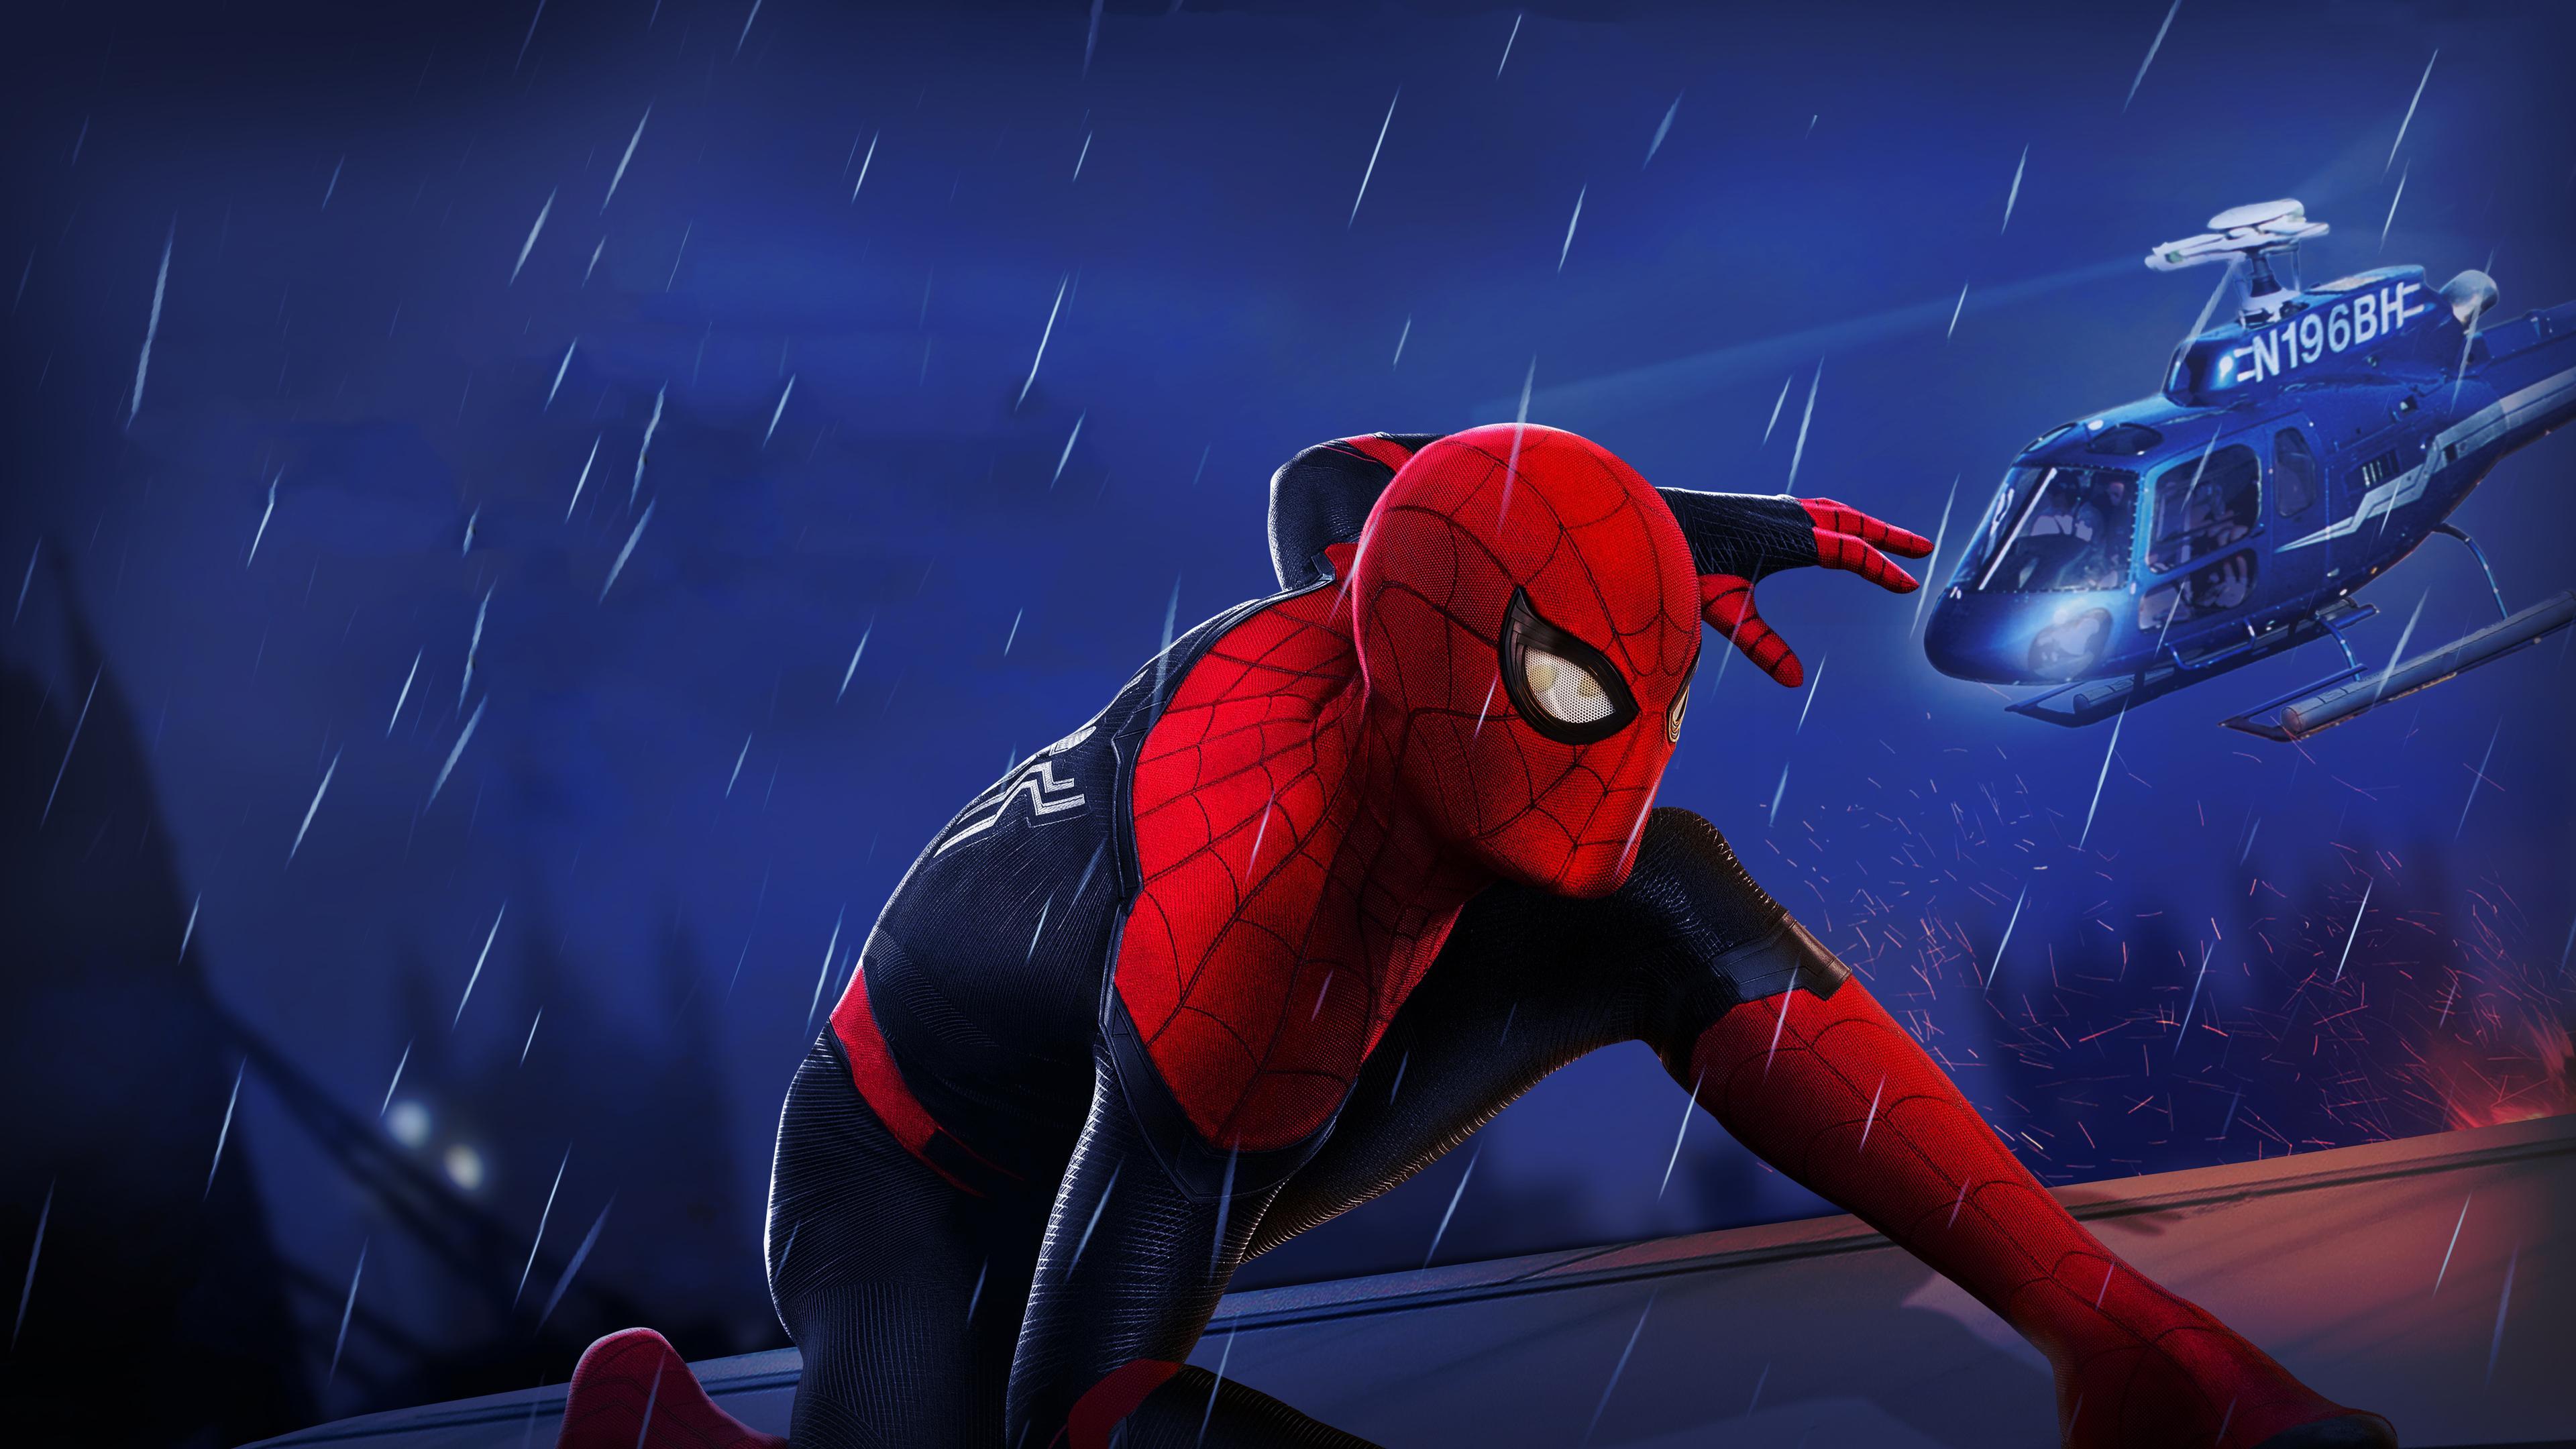 Wallpapers 4k Spiderman Far From Home Movie 4k 2019 movies wallpapers